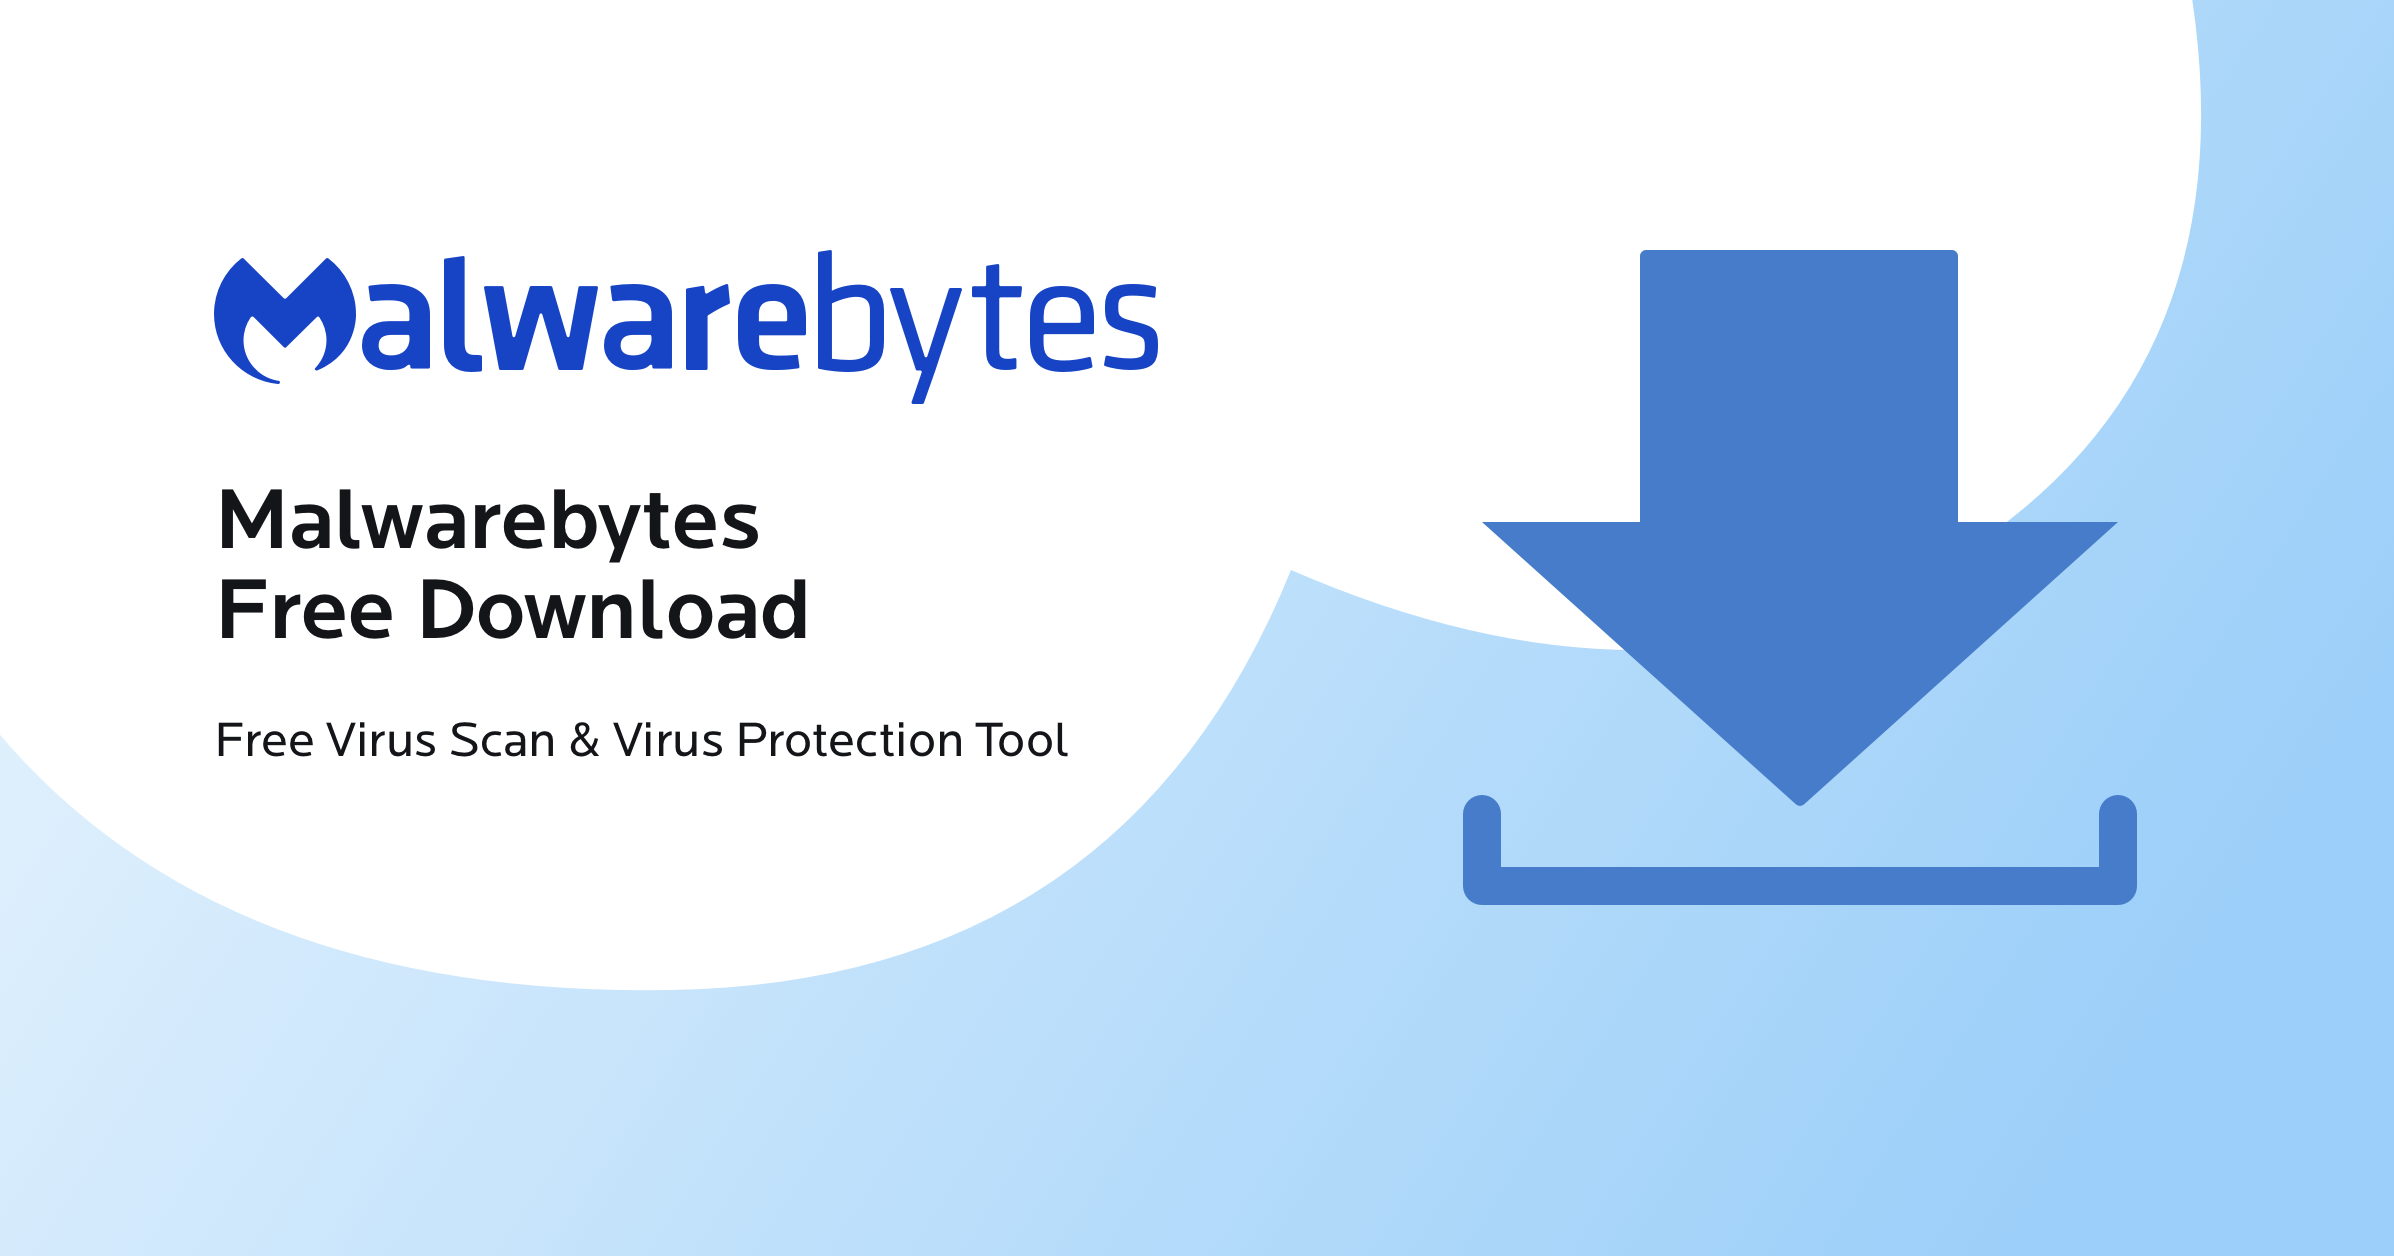 Download and install a reputable anti-malware software such as Malwarebytes
Run a full system scan to detect and remove any malicious files associated with SavingsCool